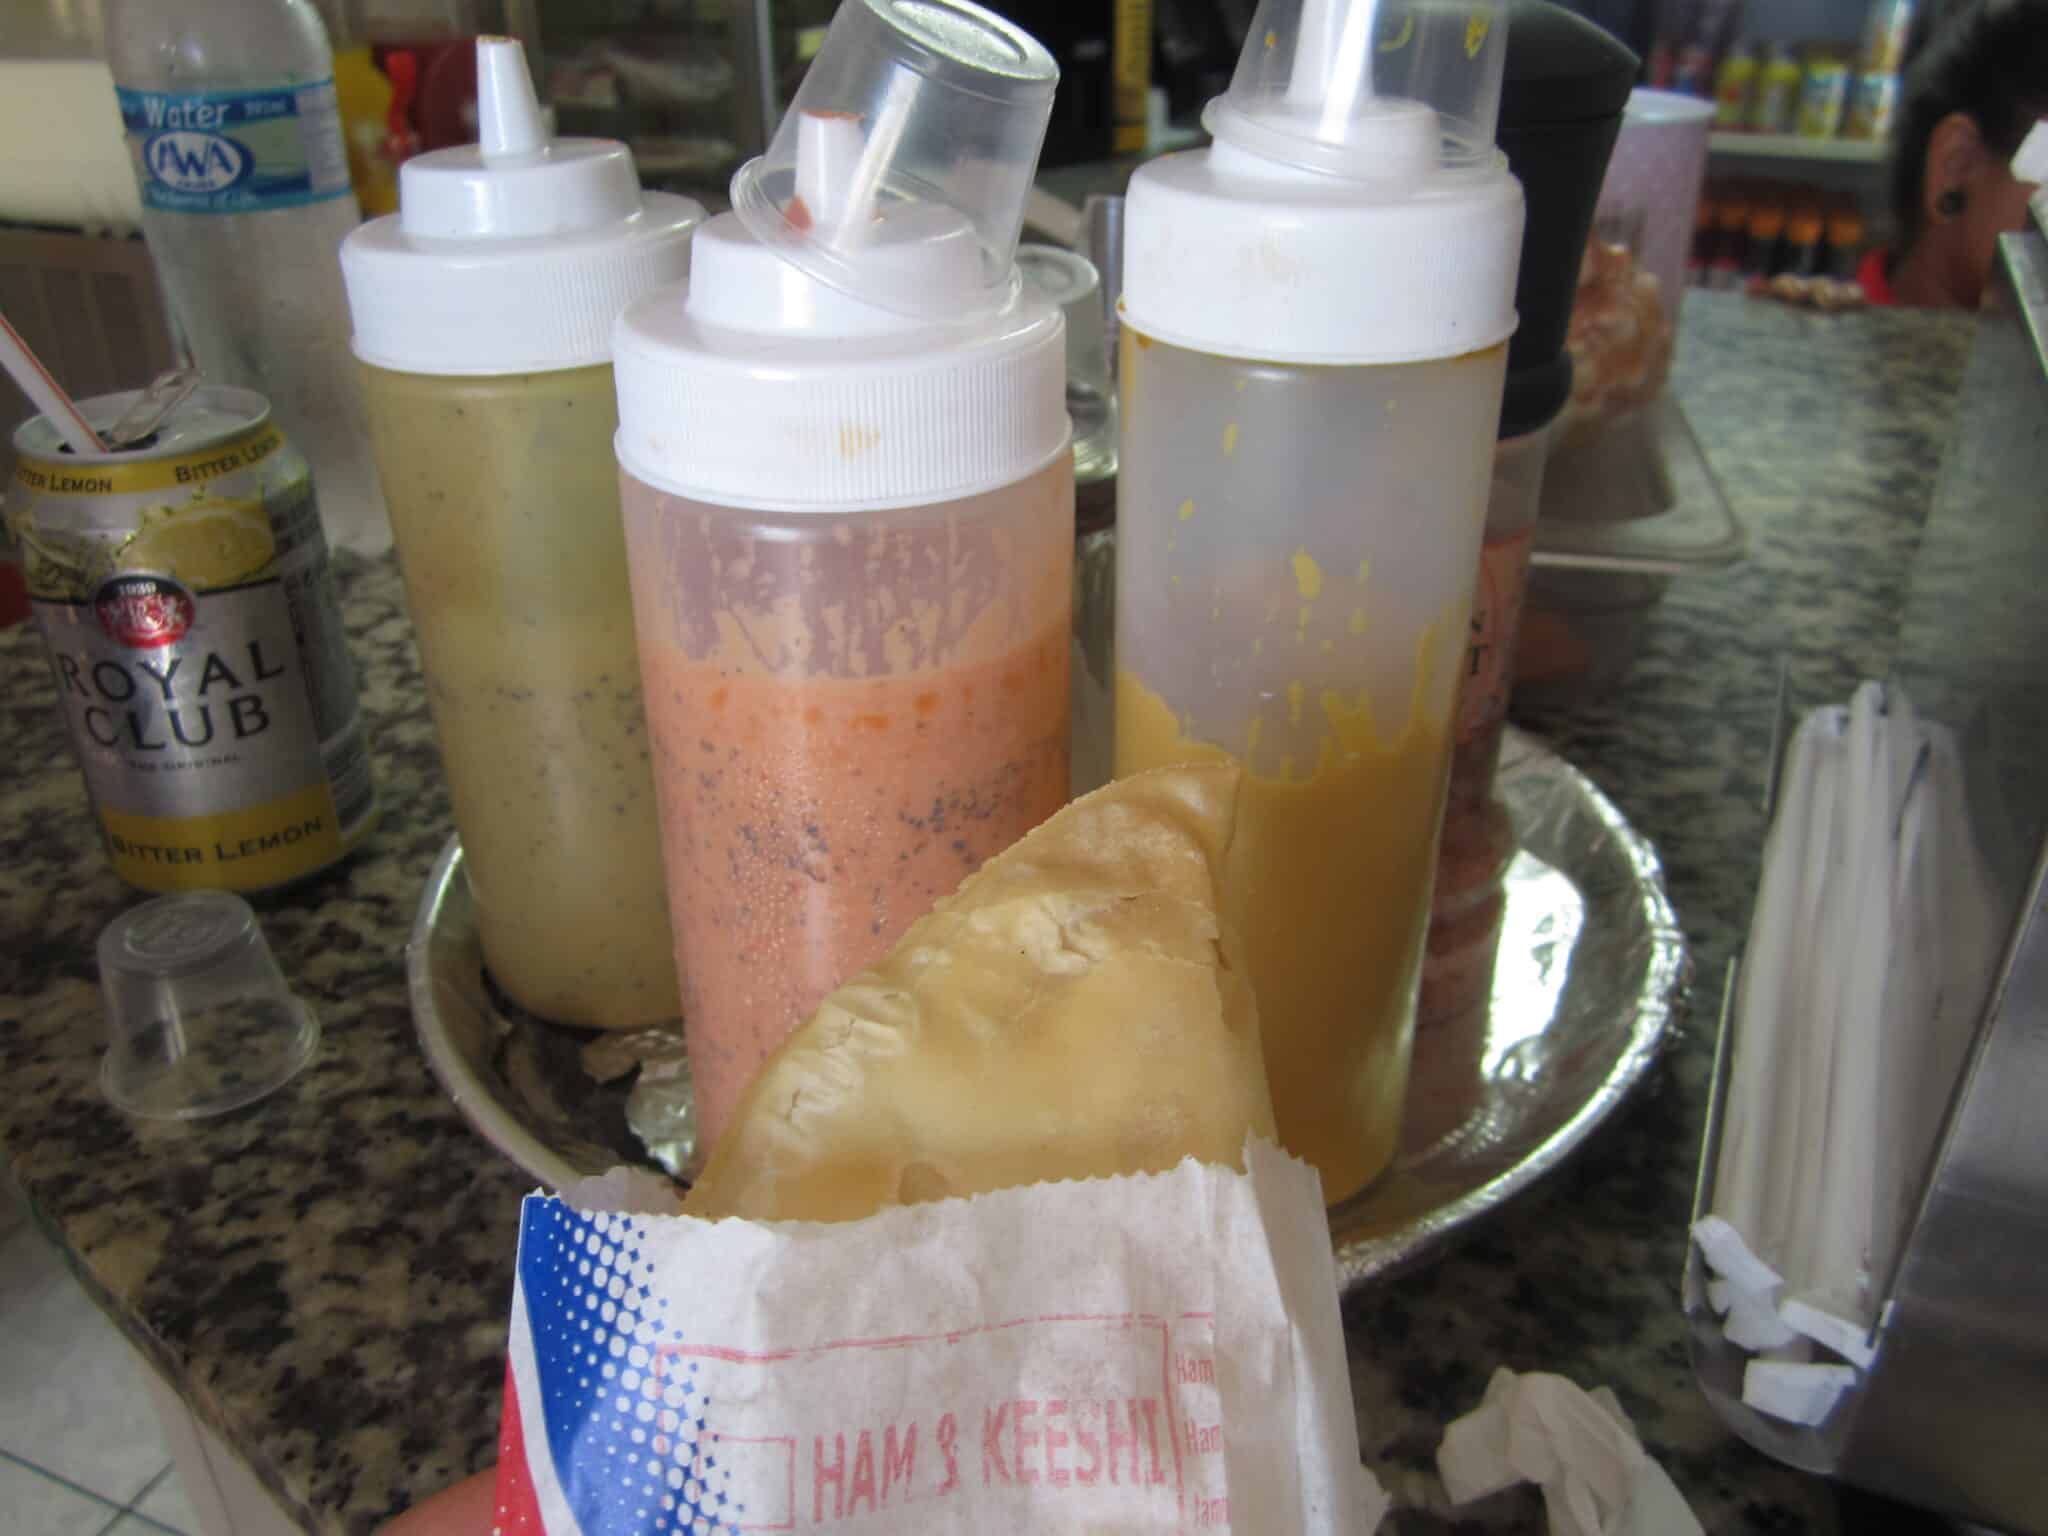 Condiments for pastechi...mild or hot?